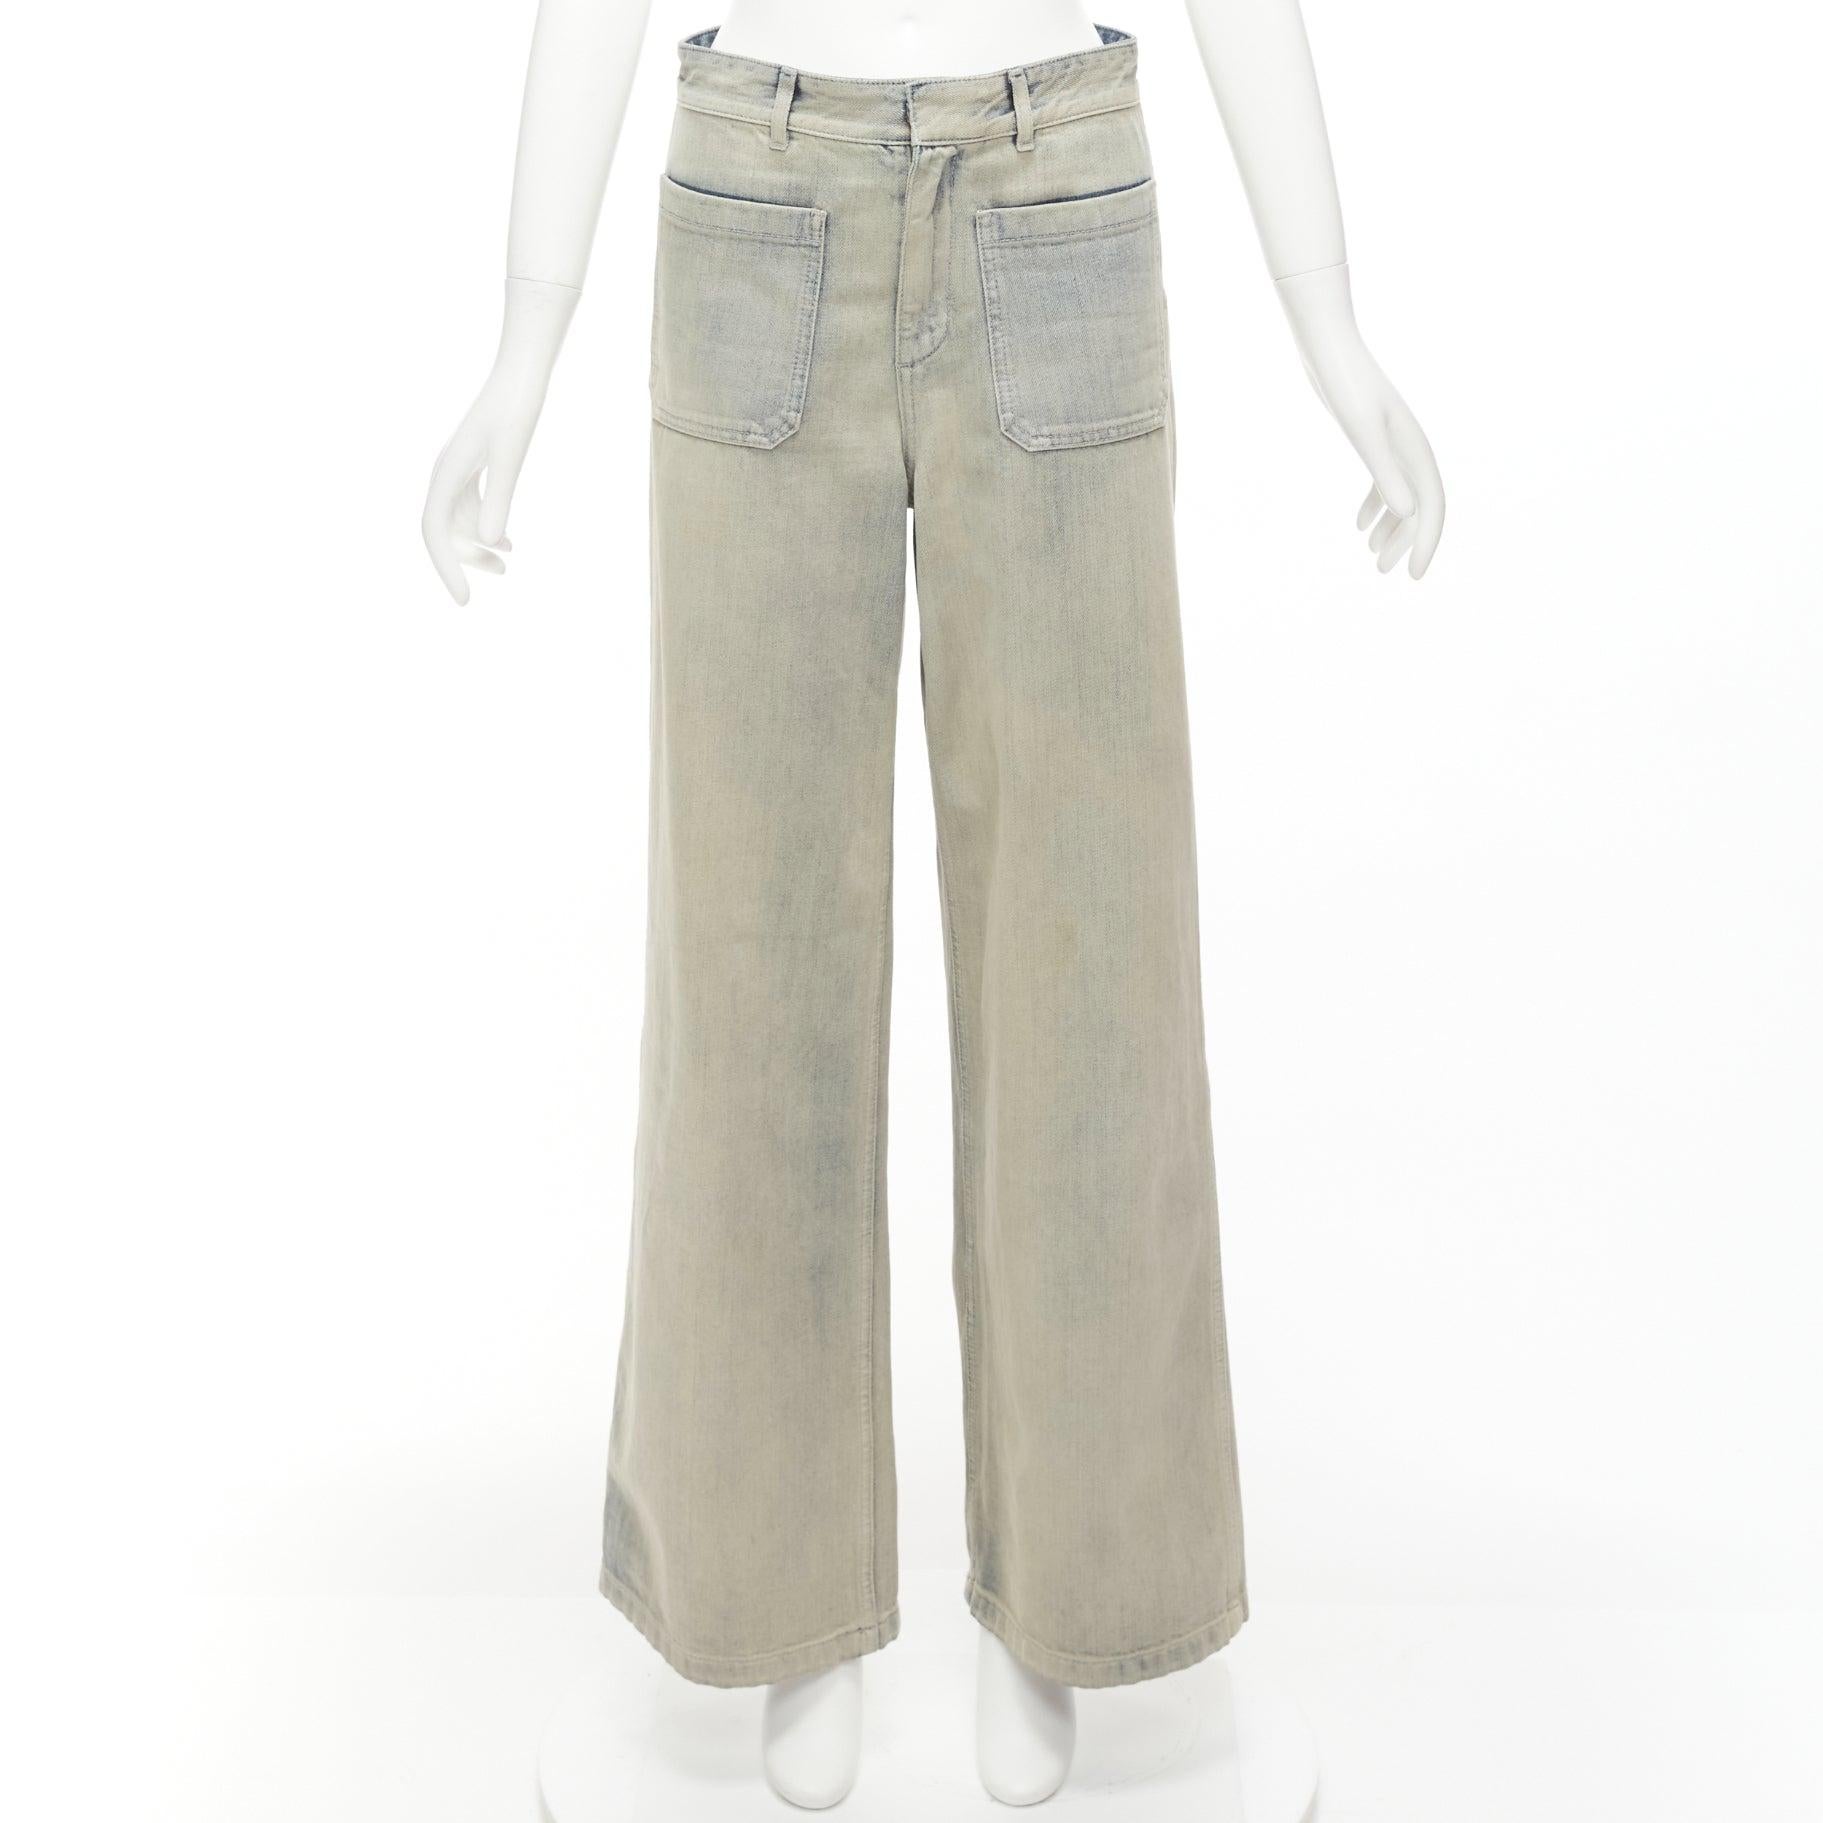 CHRISTIAN DIOR stone blue washed denim wide legs boyfriend jeans
Reference: NILI/A00042
Brand: Dior
Designer: Maria Grazia Chiuri
Material: Denim
Color: Blue
Pattern: Solid
Closure: Zip Fly
Extra Details: Brown buttons at back with signature darted